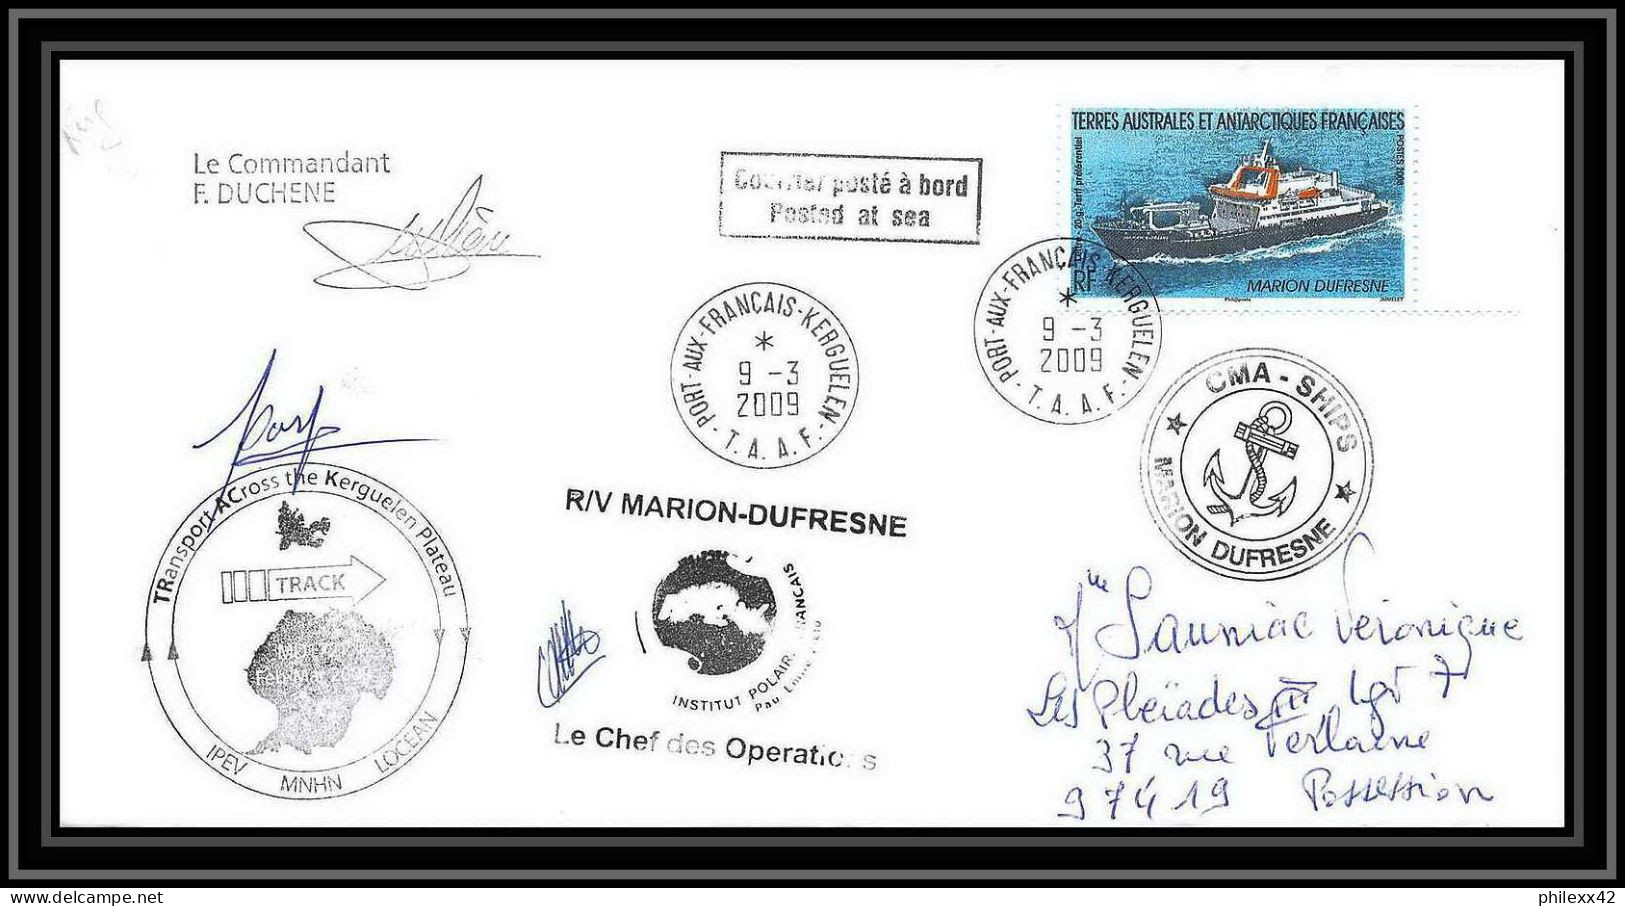 2887 Dufresne 2 Signé Signed Md 172 Kerguelen 9/3/2009 N°520 ANTARCTIC Terres Australes (taaf) Lettre Cover - Antarctic Expeditions